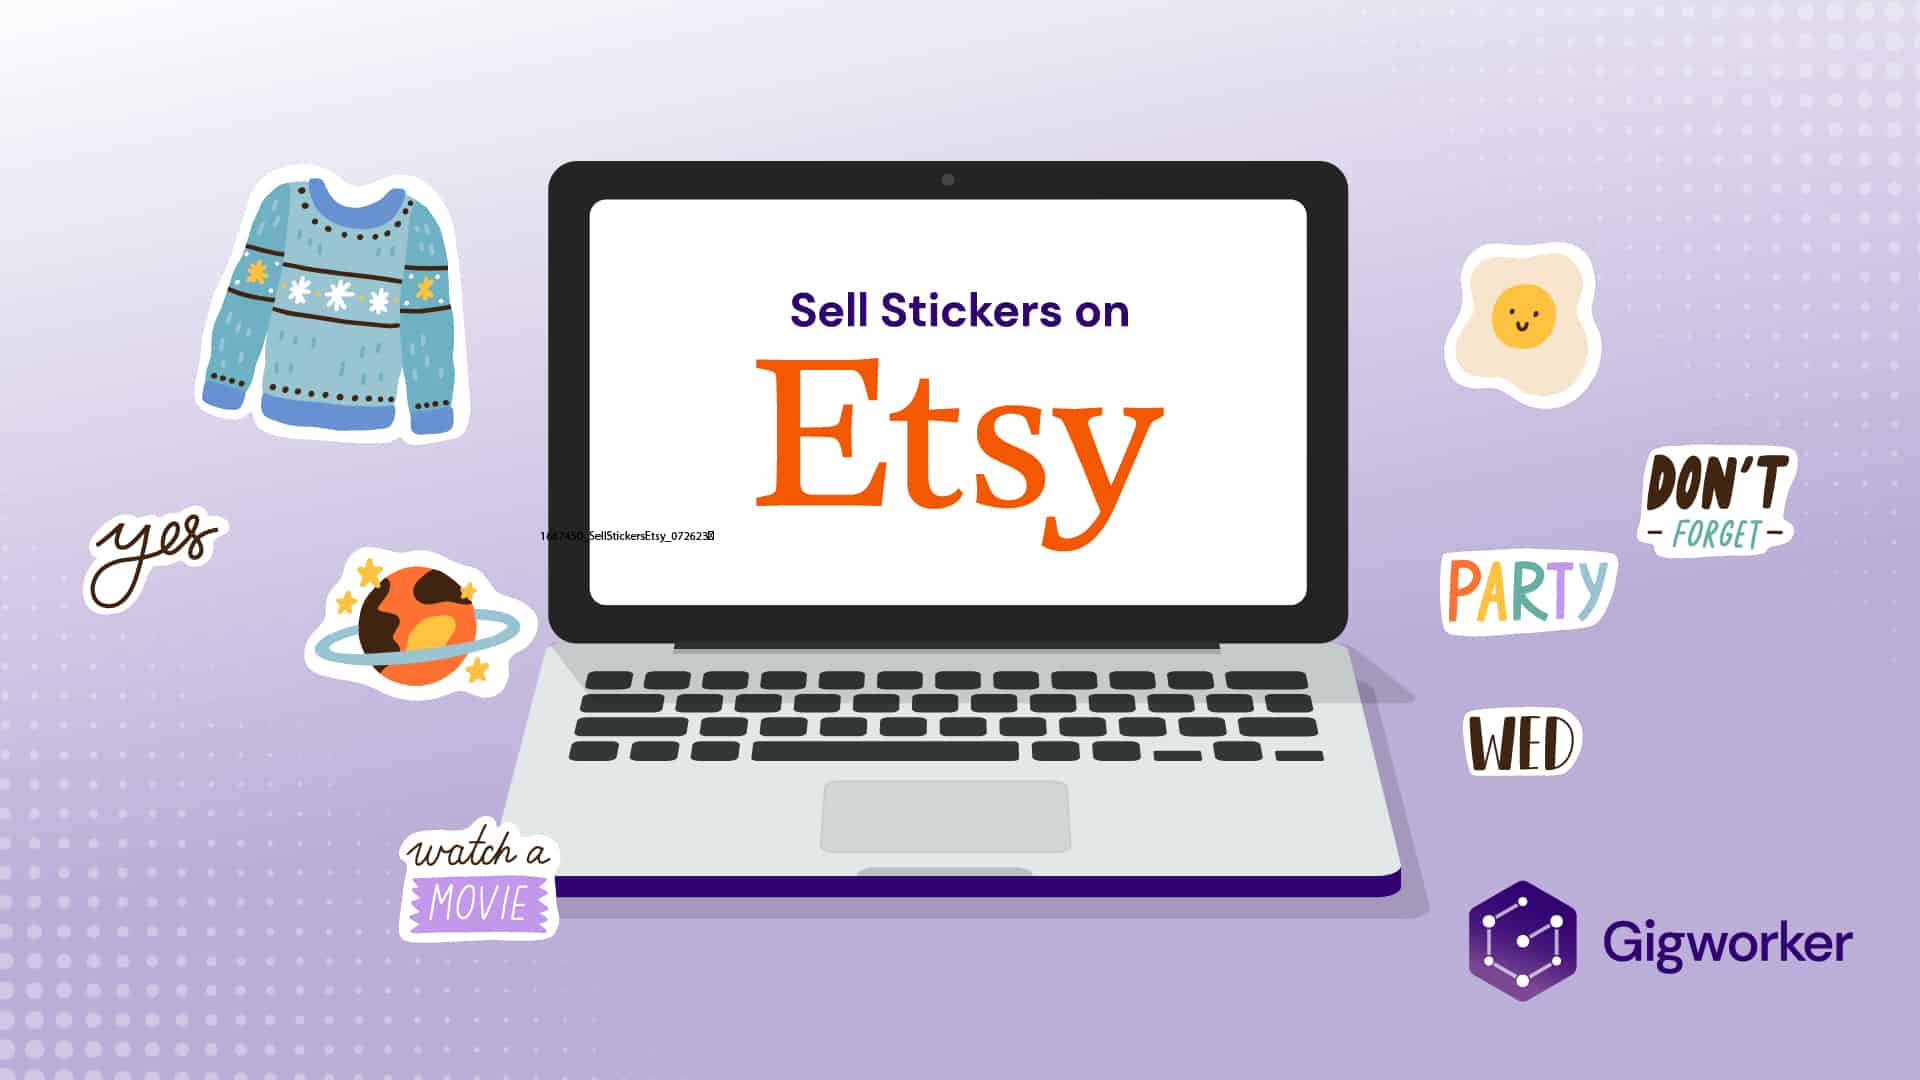 vector graphic showing an illustration of selling stickers on etsy